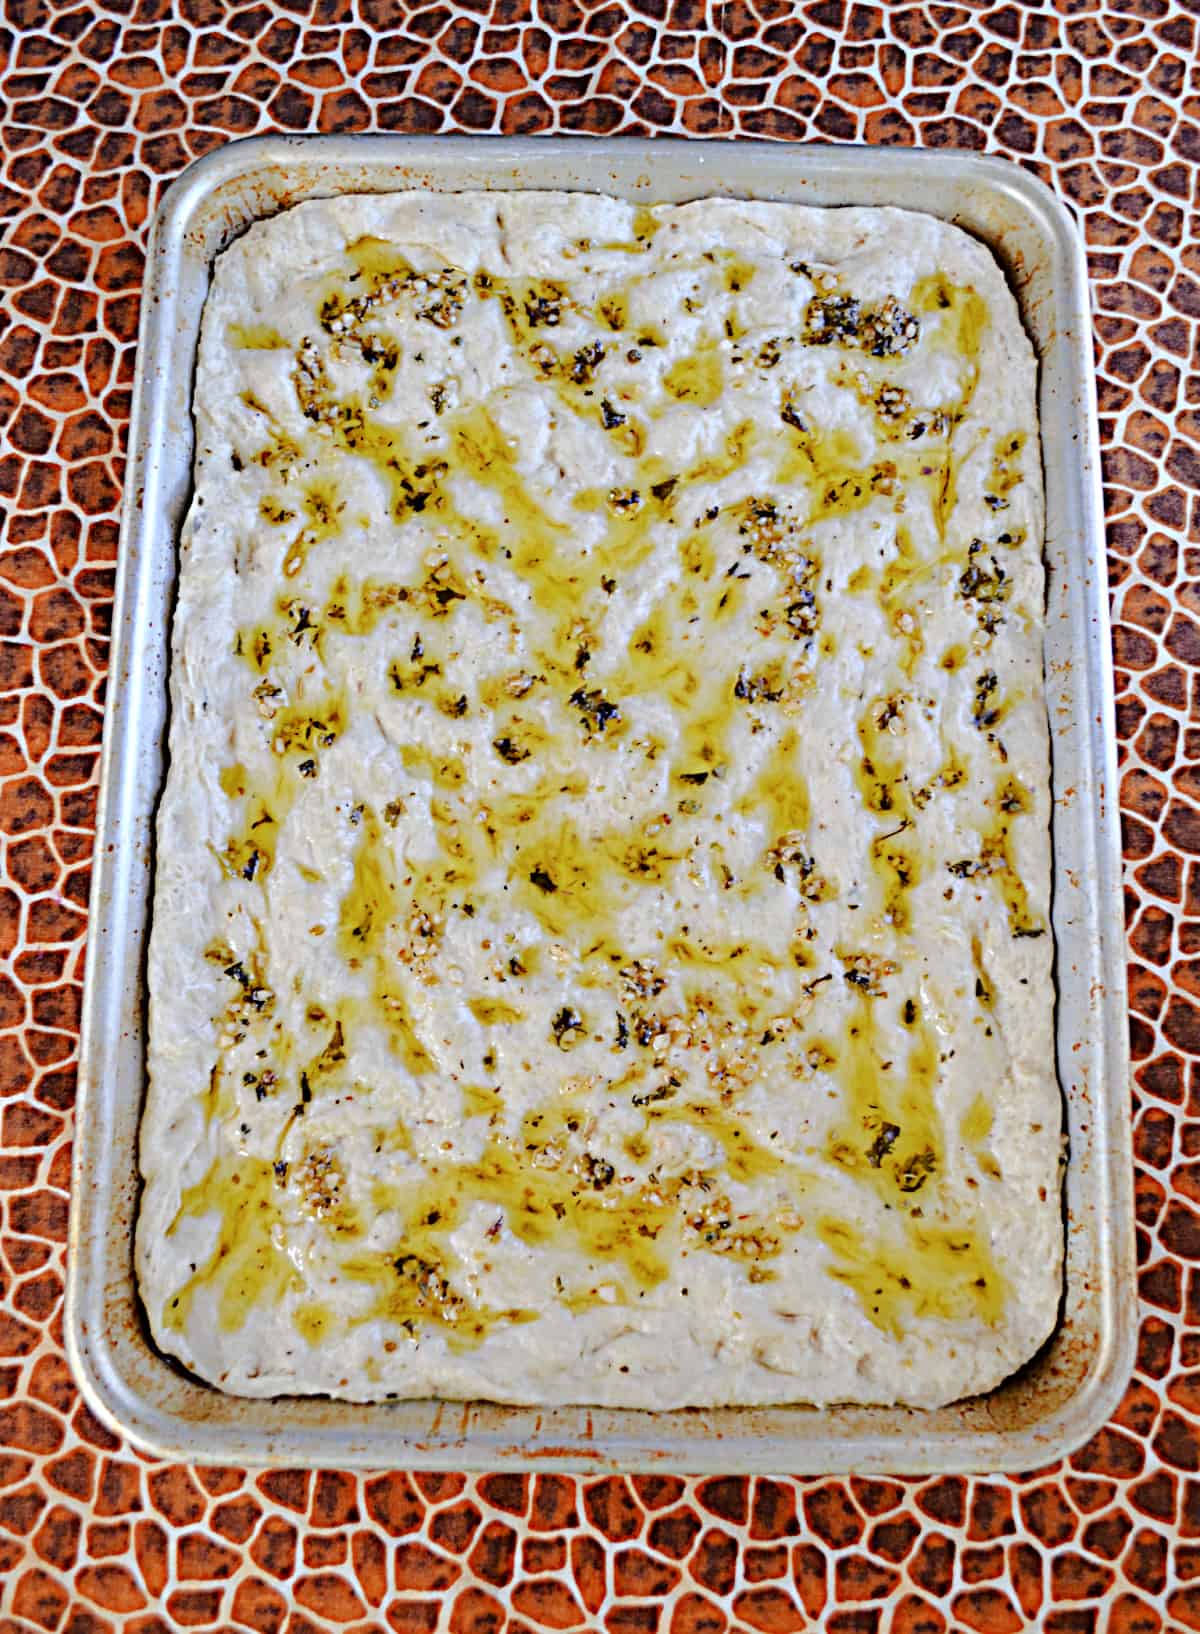 A pan of bread dough with olive oil drizzled over top of the dough.